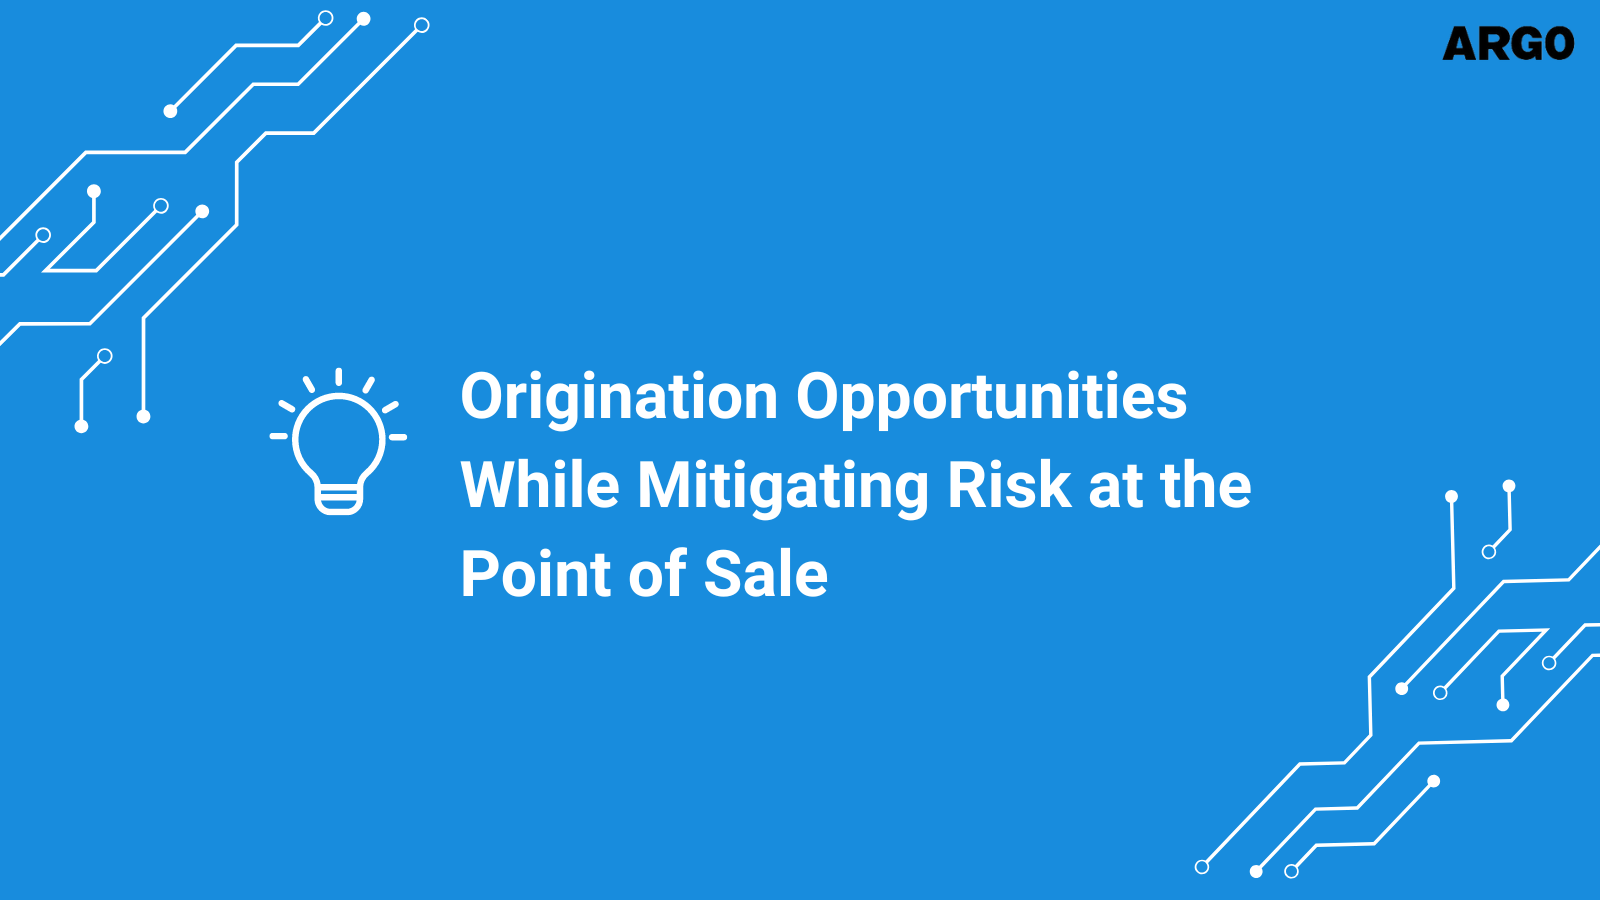 Origination Opportunities While Mitigating Risk at the Point of Sale